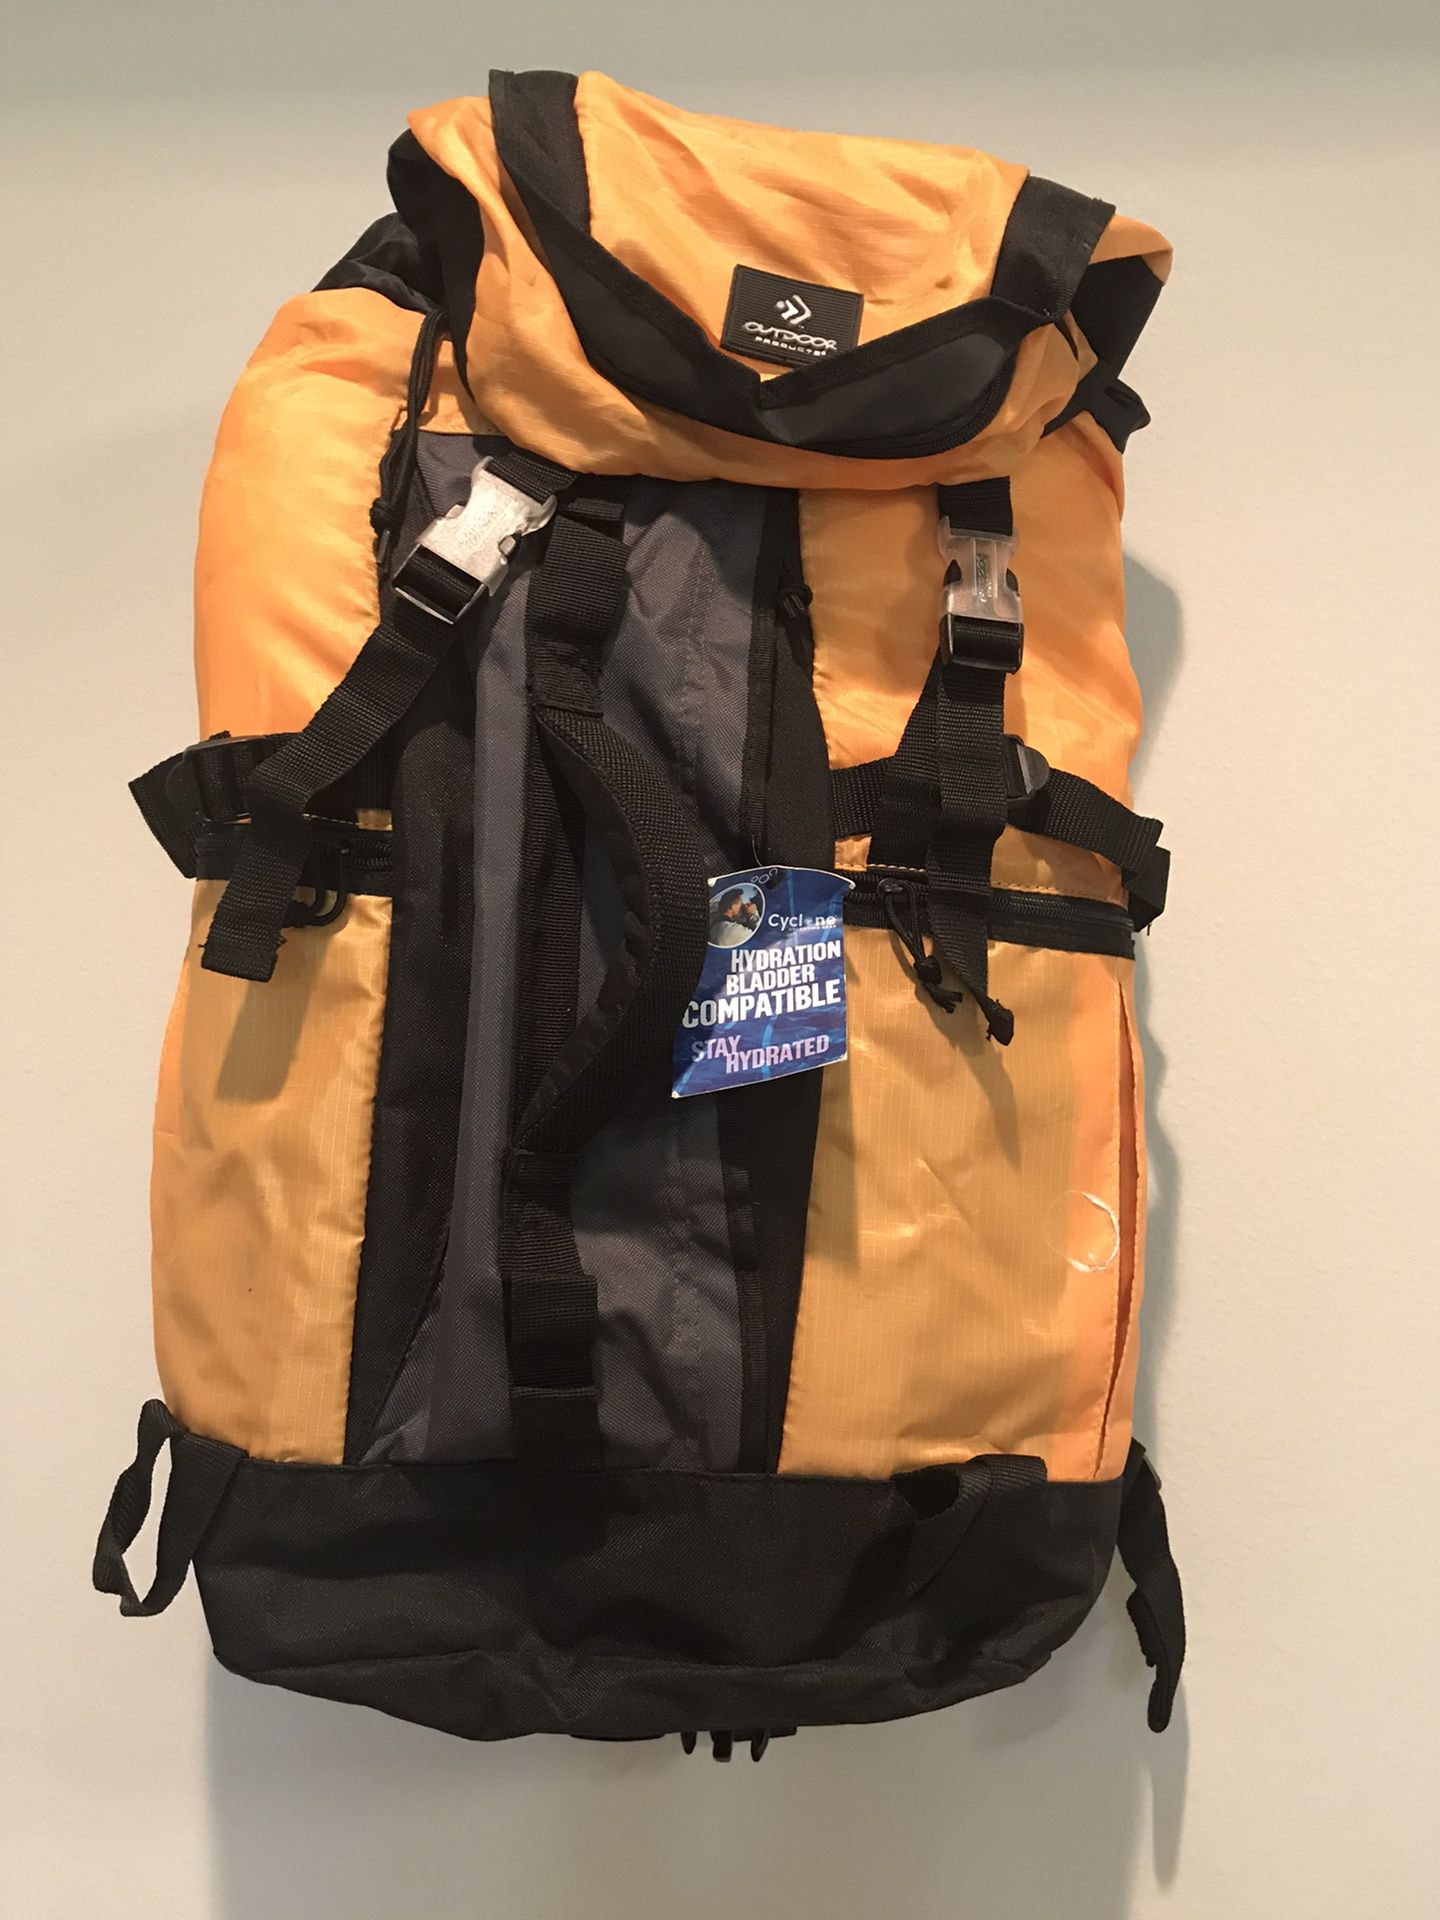 Hiking backpack -available until 8/1